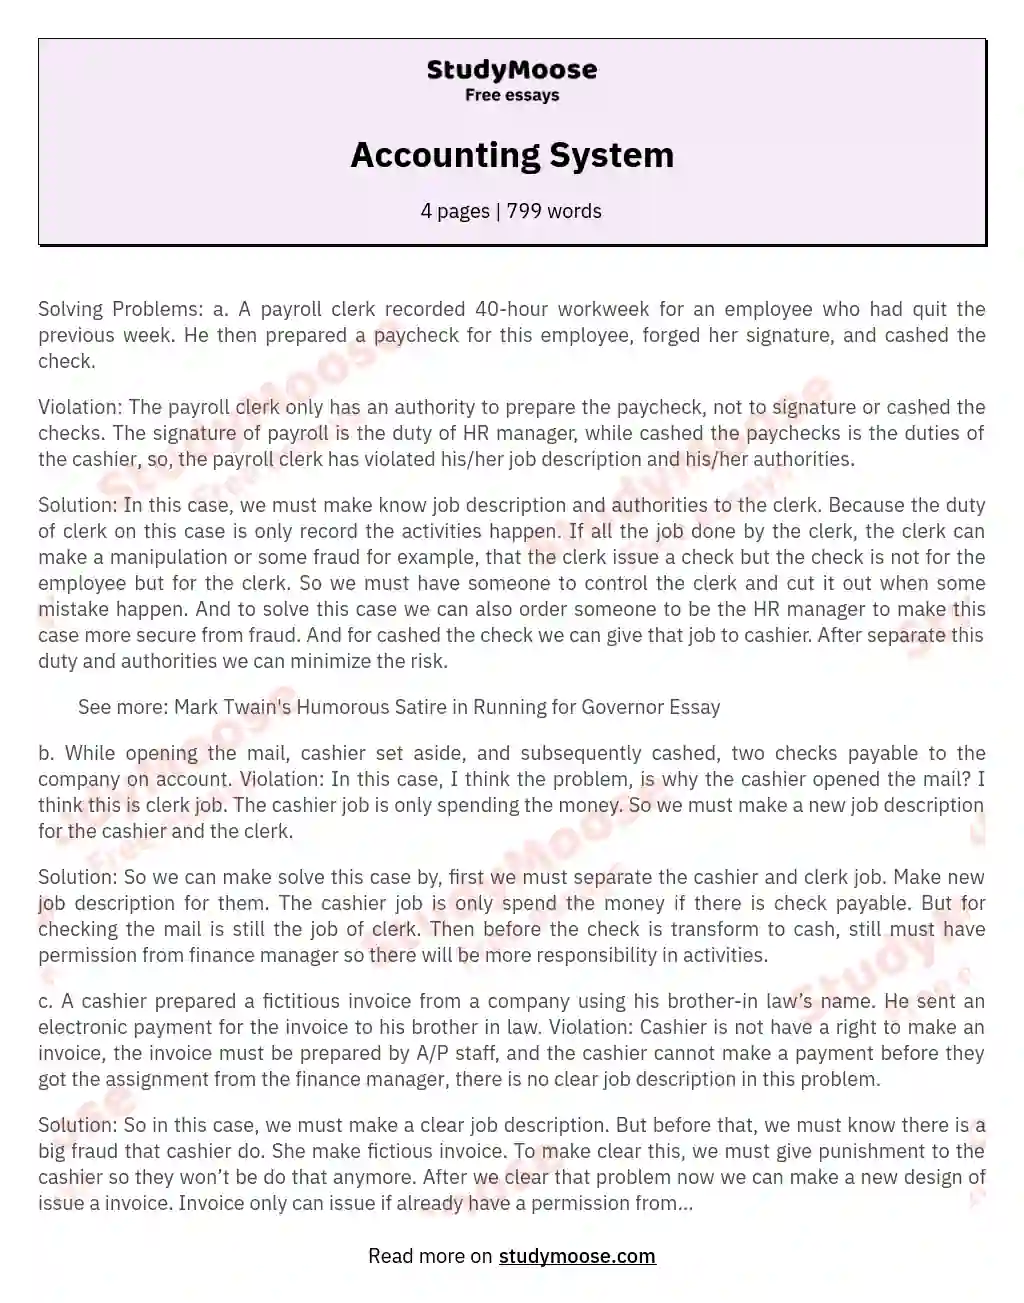 Accounting System essay